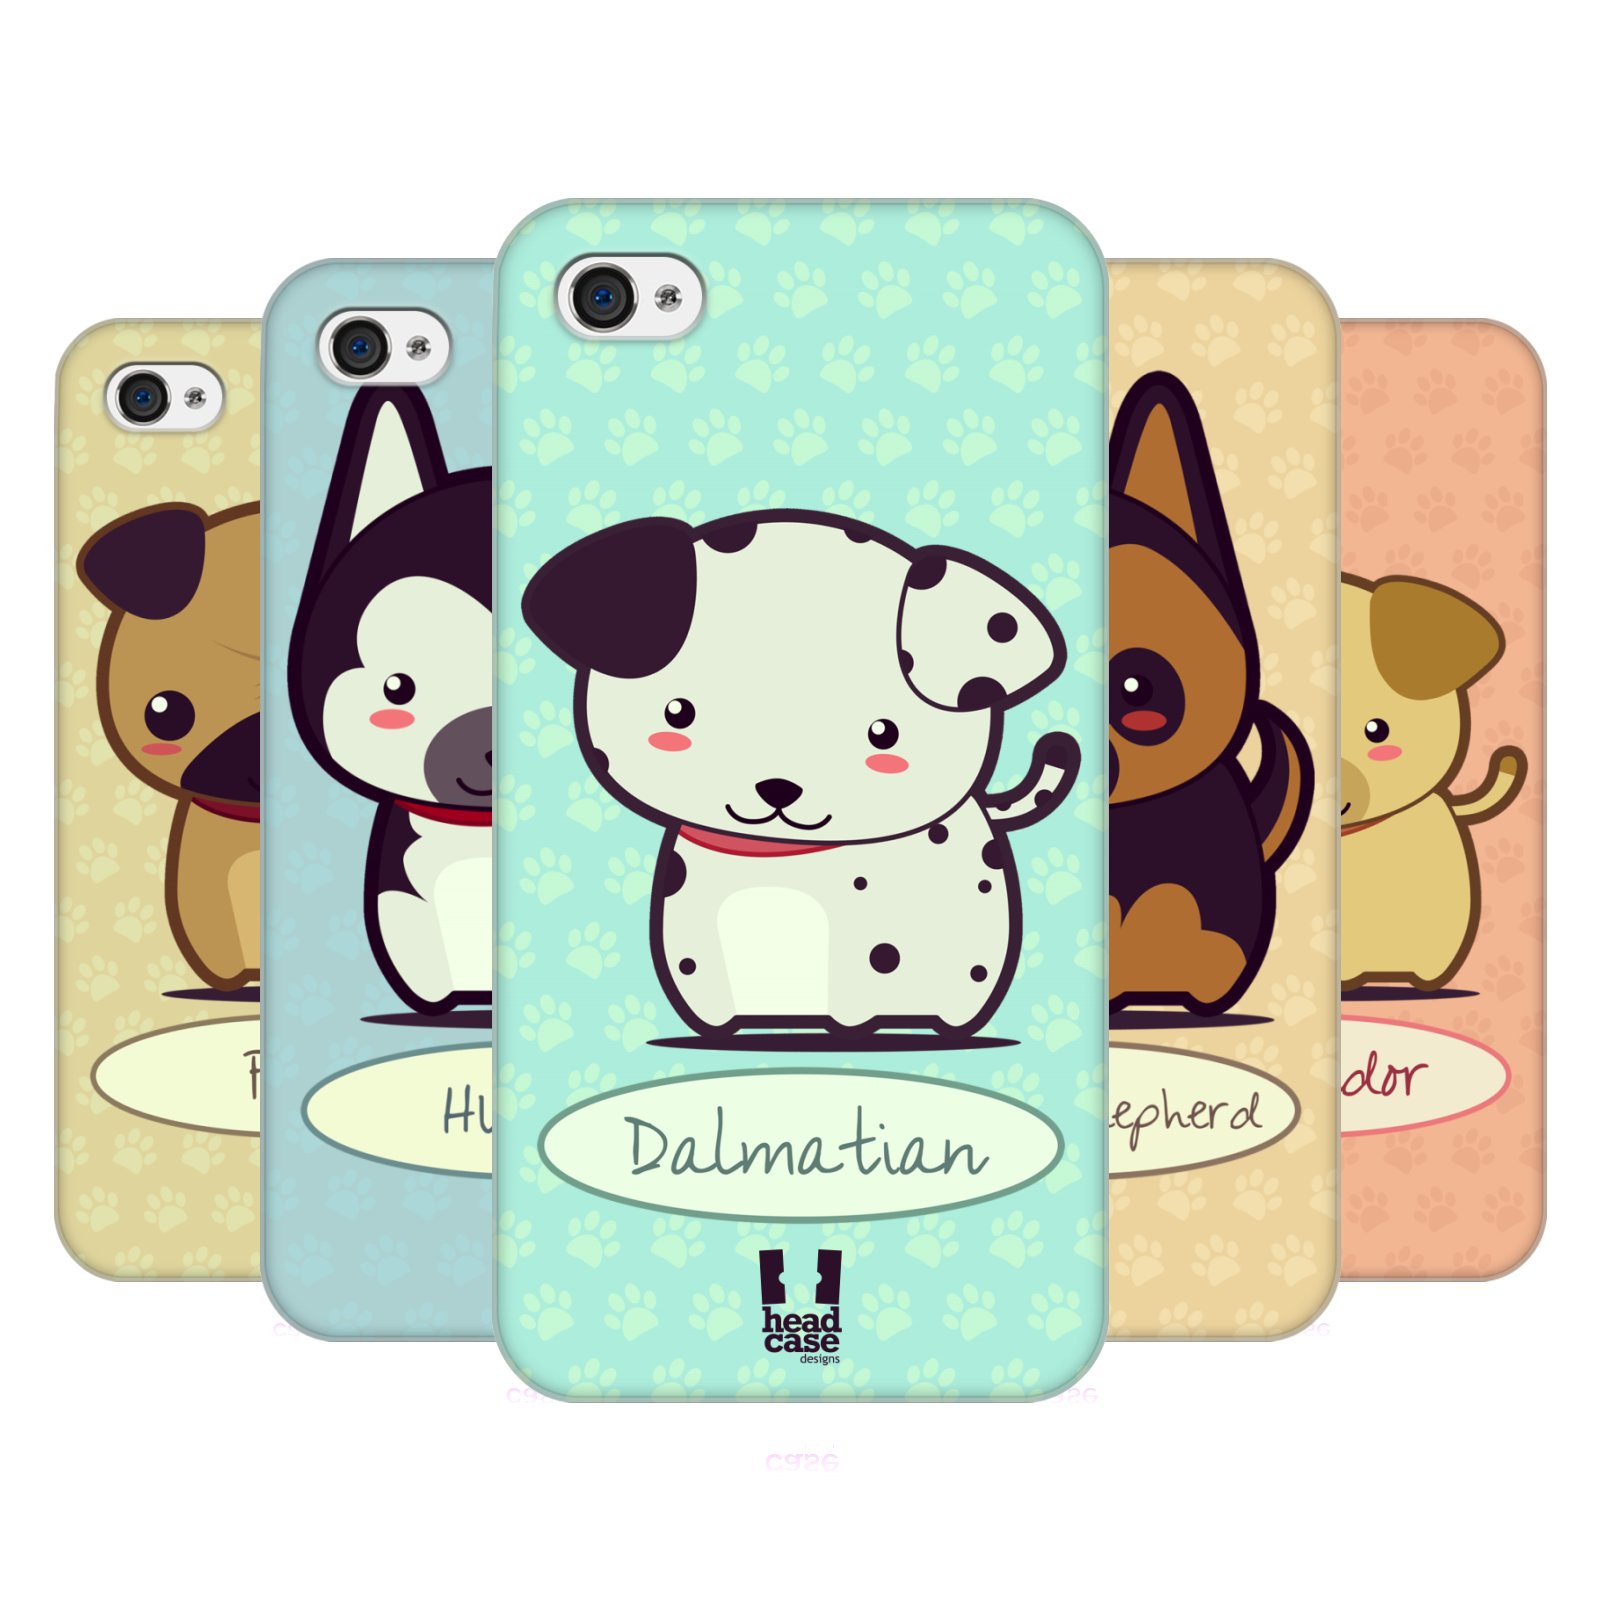 HEAD CASE DESIGNS WONDER DOG PROTECTIVE BACK CASE COVER FOR APPLE iPHONE 4 4S